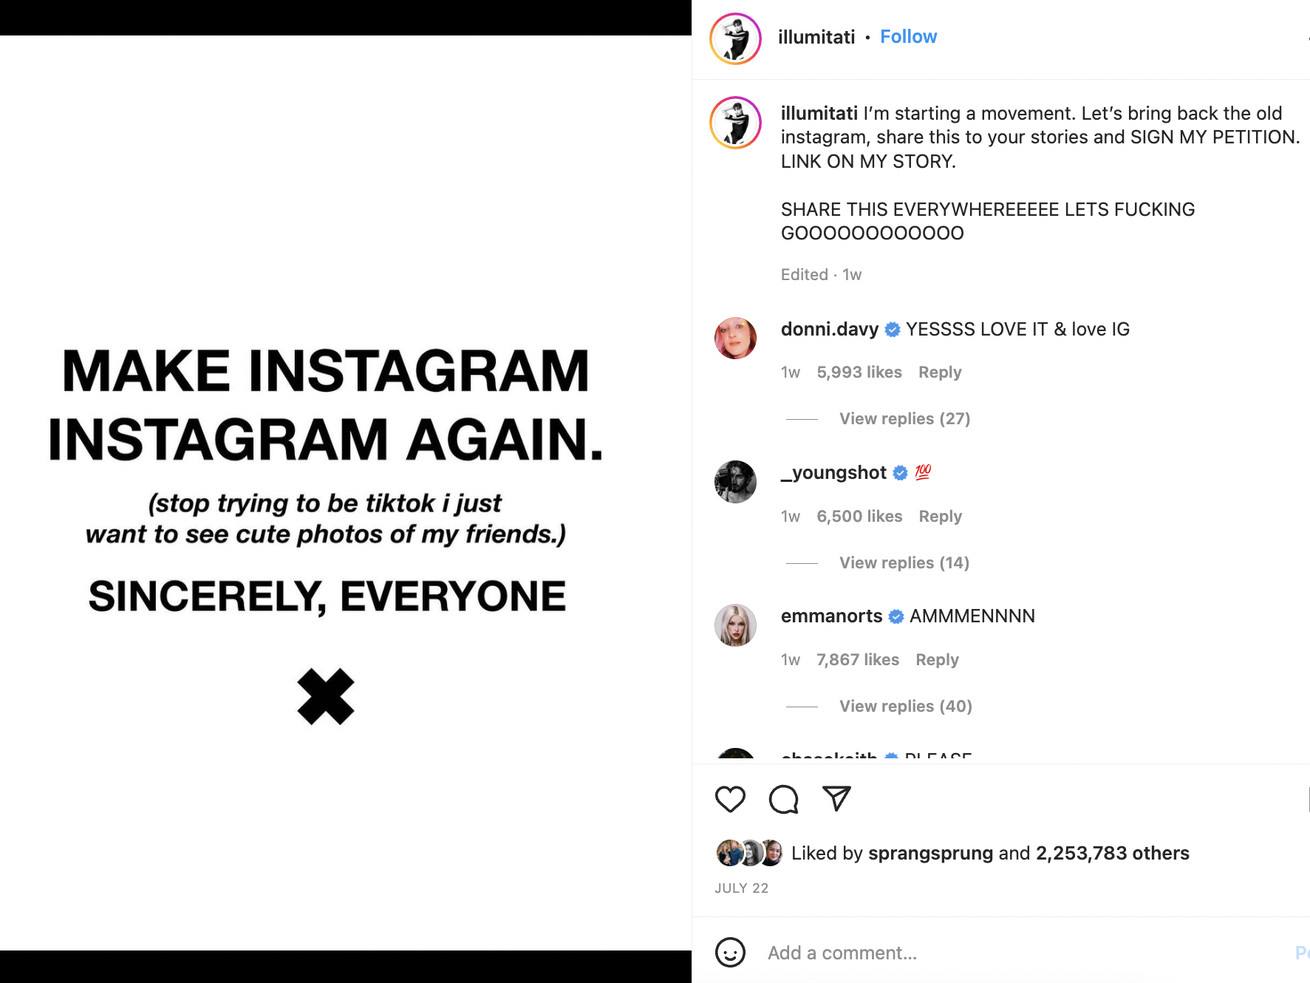 Instagram is once again in its flop era